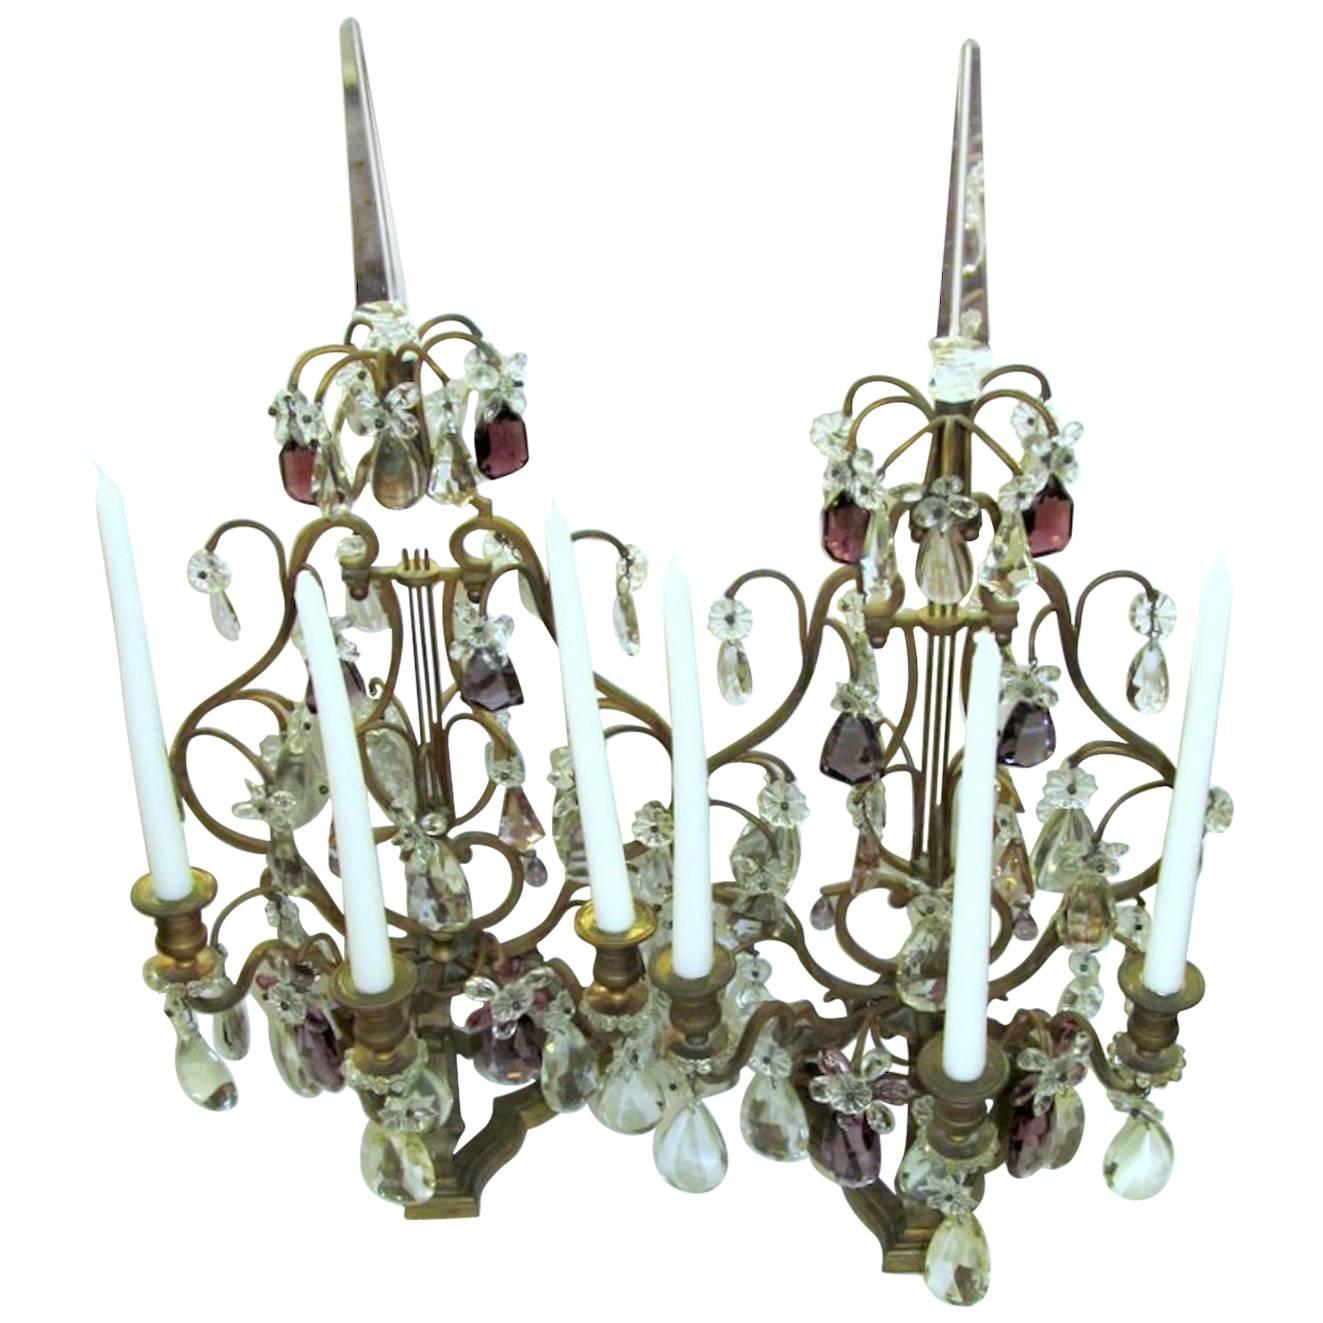 Pair of Antique French Ormolu and Cut Crystal Three-Light Candelabra